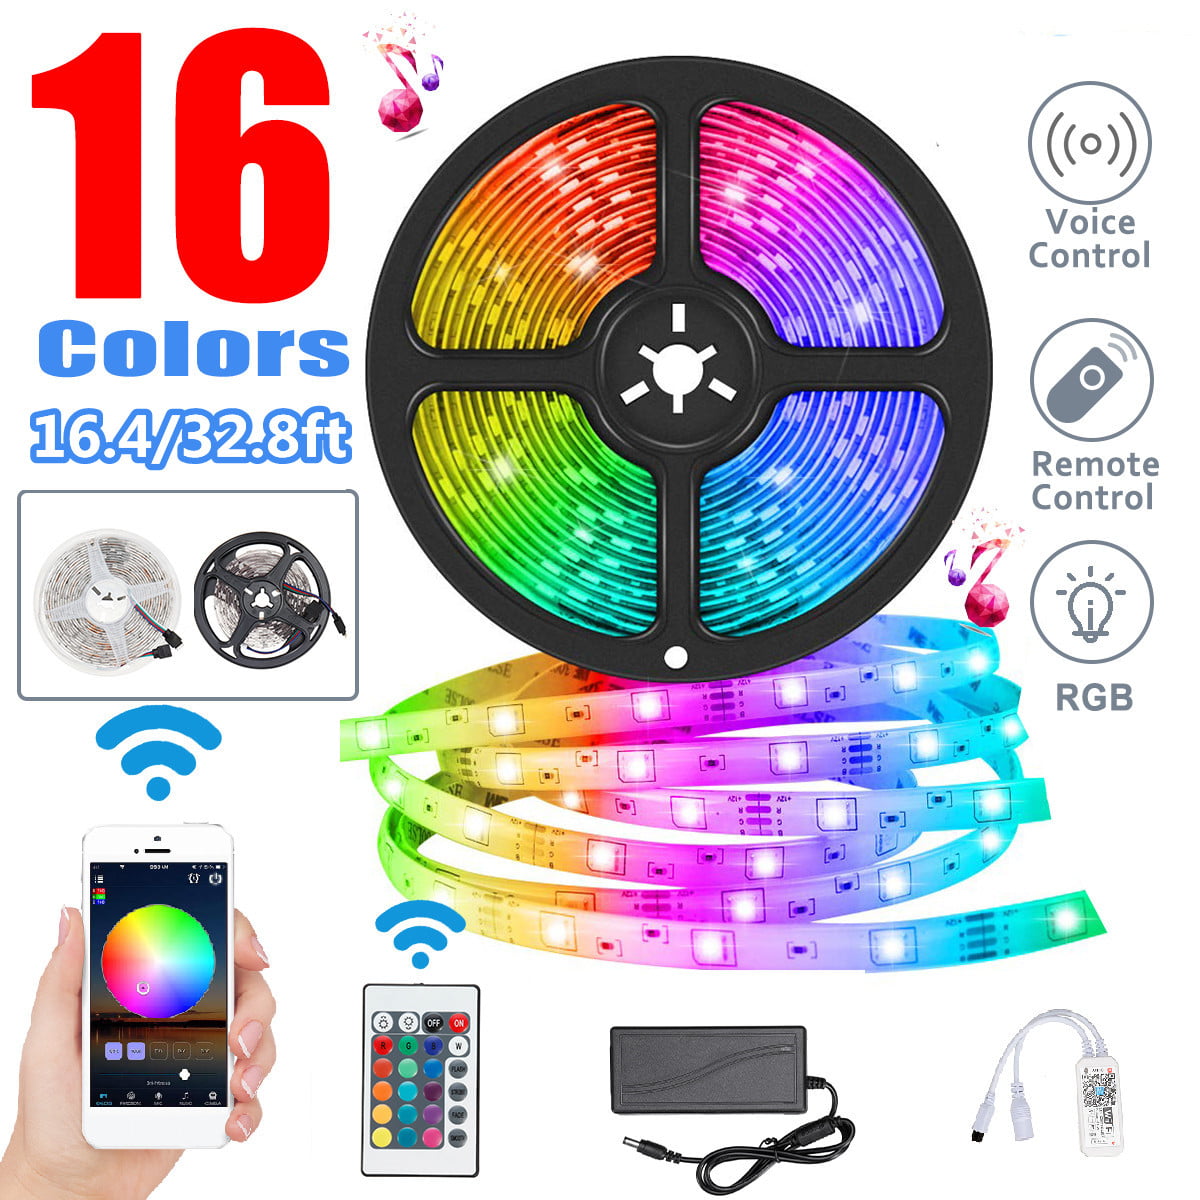 Details about   16.4/32 Feet RGB Waterproof LED Strip Light SMD 44 Key Remote Power Full Kit USA 